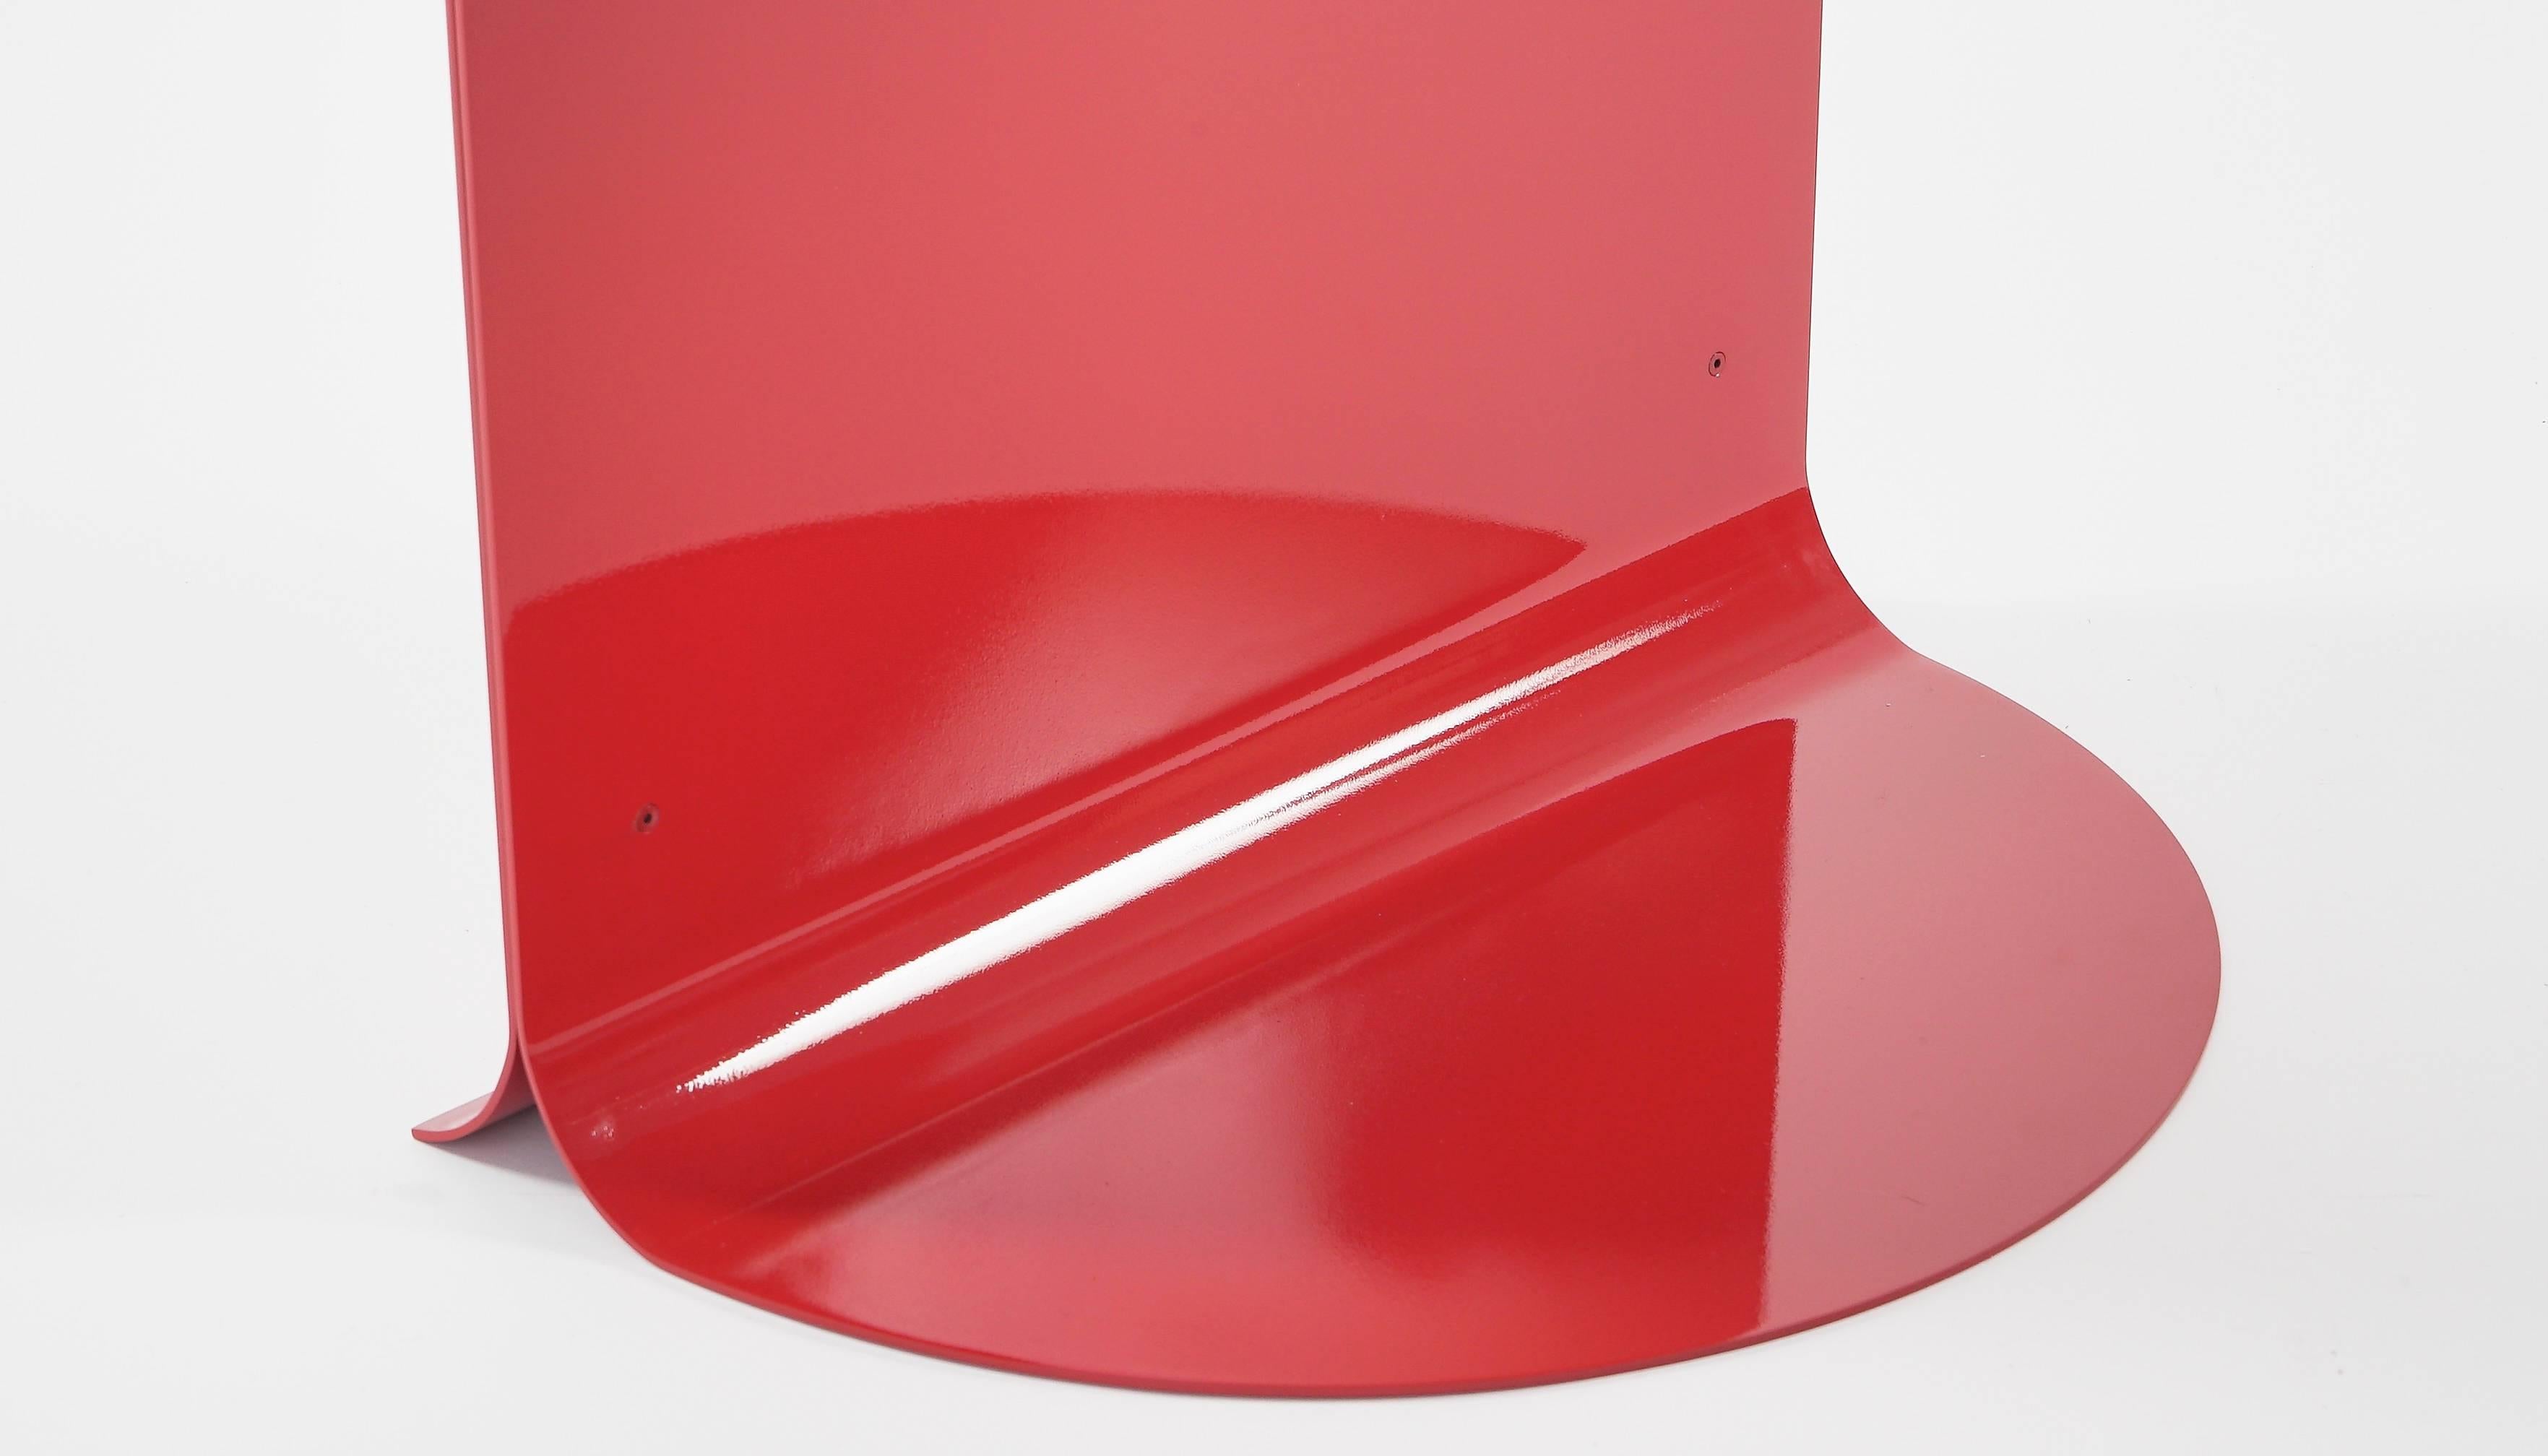 O Table in Stainless Steel (Red) by Estudio Persona im Zustand „Neu“ in Los Angeles, CA